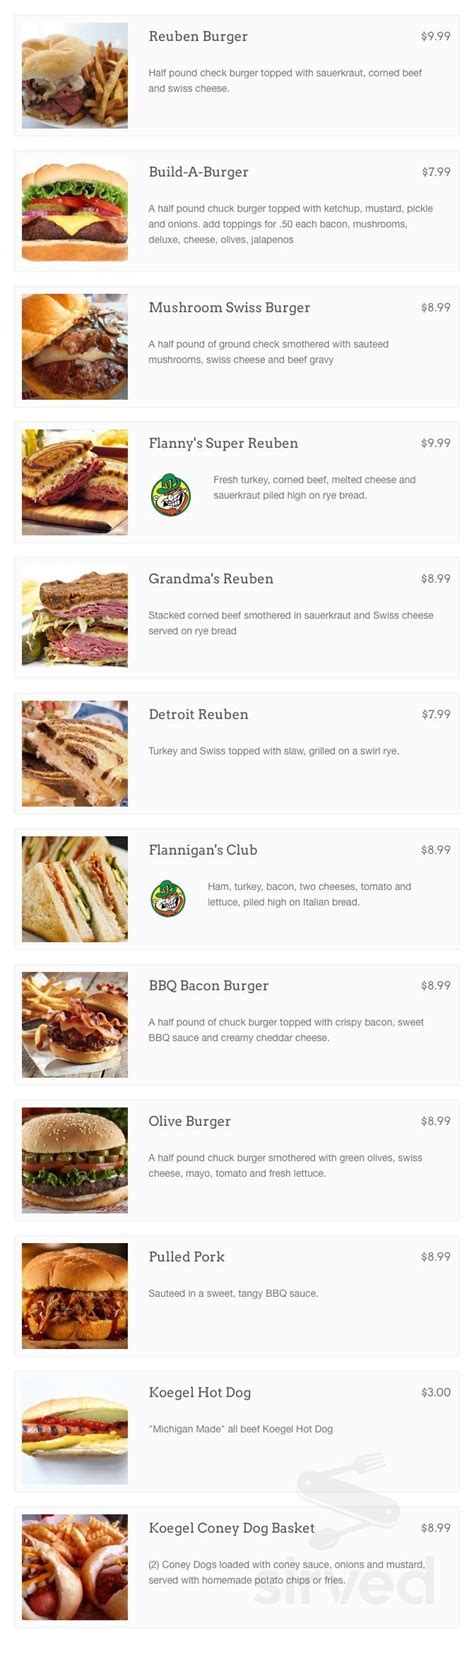 Flannigans saginaw mi menu Latest reviews, photos and 👍🏾ratings for Flannigans at 7734 Gratiot Rd in Saginaw - view the menu, ⏰hours, ☎️phone number, ☝address and map